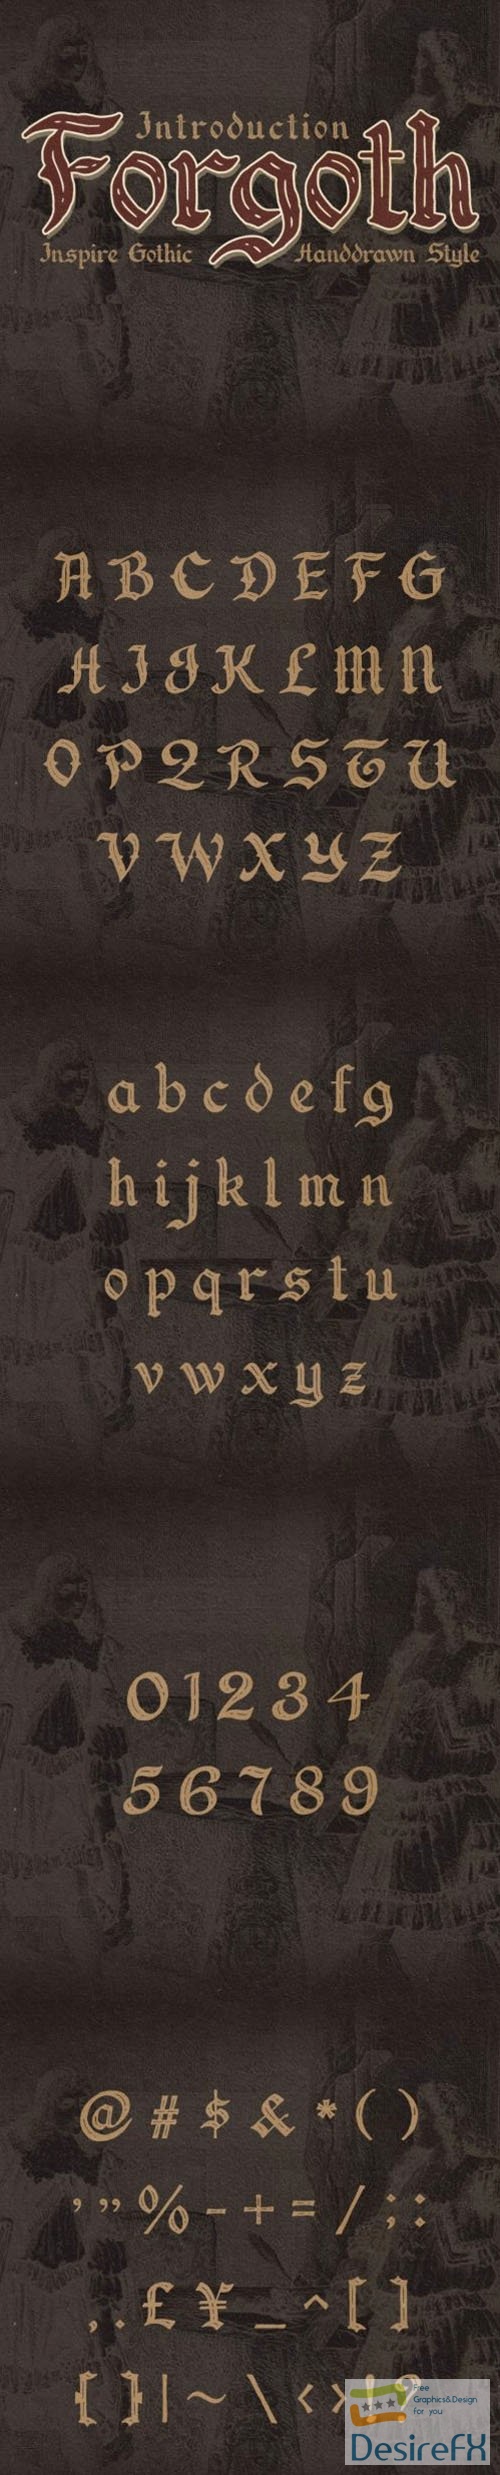 Forgoth Typeface - Inspire Gothic Hand Drawn Style